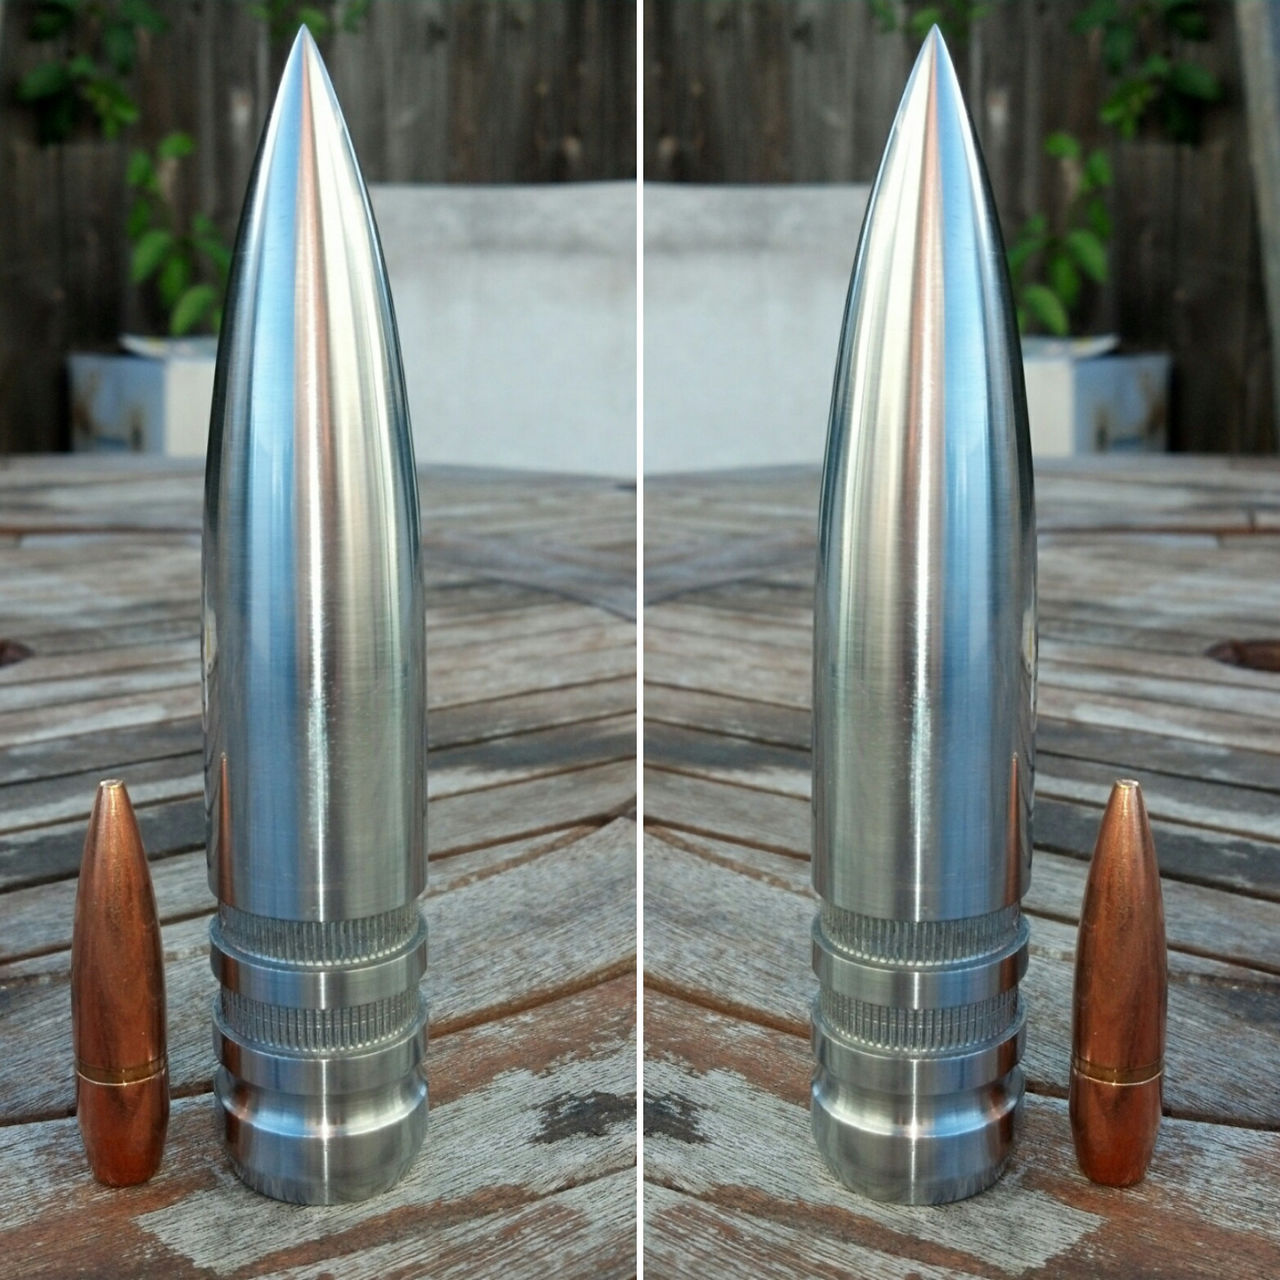 side by side comparrioson of a .50 caliber round and a 30mm round